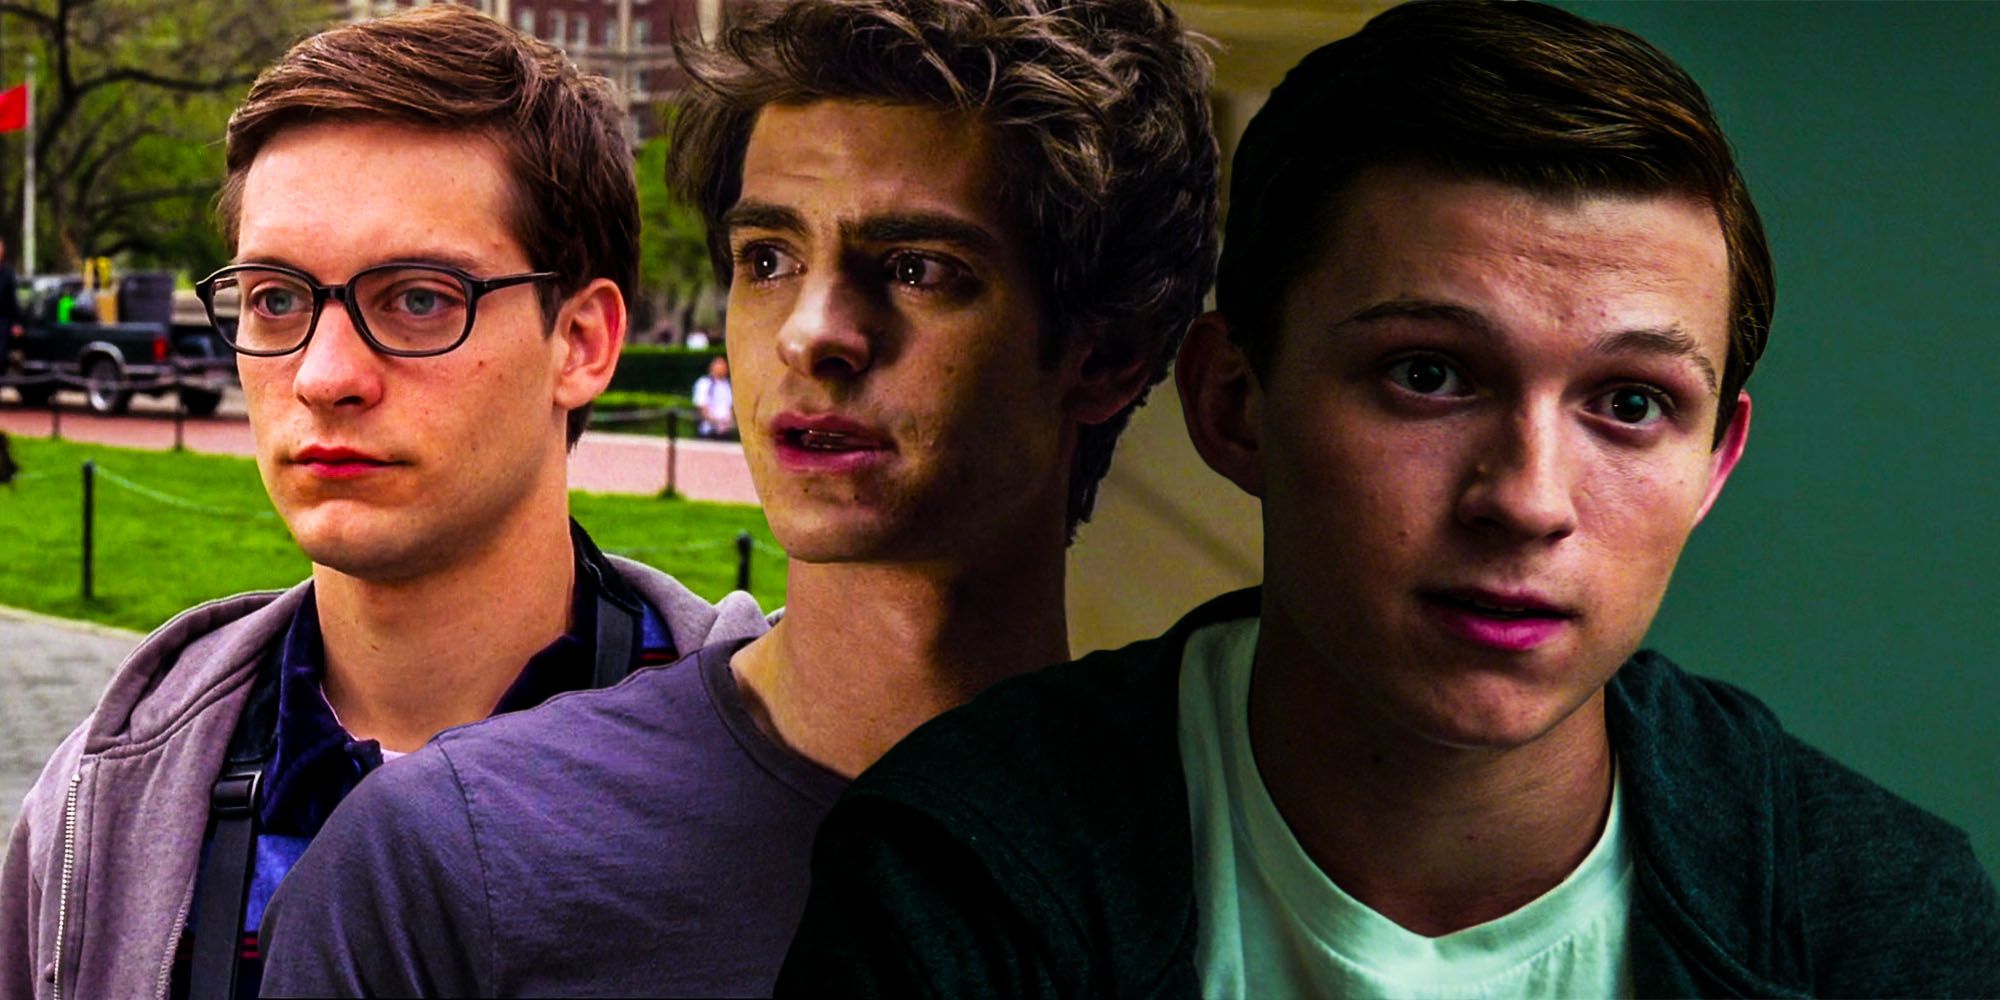 SpiderMan Producer Compares Tom Holland to Maguire & Garfield